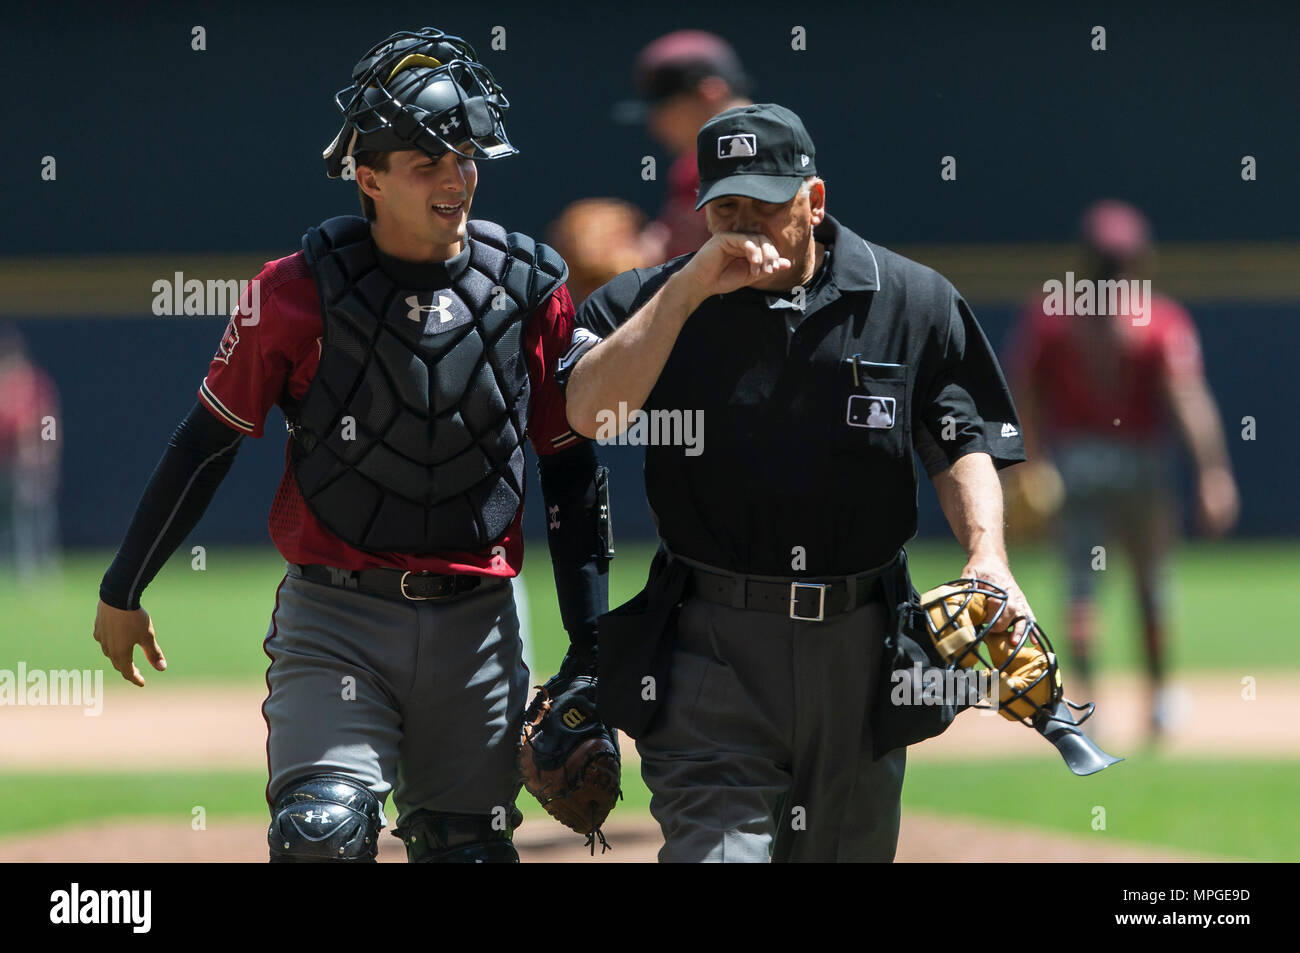 Milwaukee, WI, USA. 23rd May, 2018. Arizona Diamondbacks catcher John Ryan Murphy #36 talks with home plate umpire after a mound visit during the Major League Baseball game between the Milwaukee Brewers and the Arizona Diamondbacks at Miller Park in Milwaukee, WI. John Fisher/CSM/Alamy Live News Stock Photo